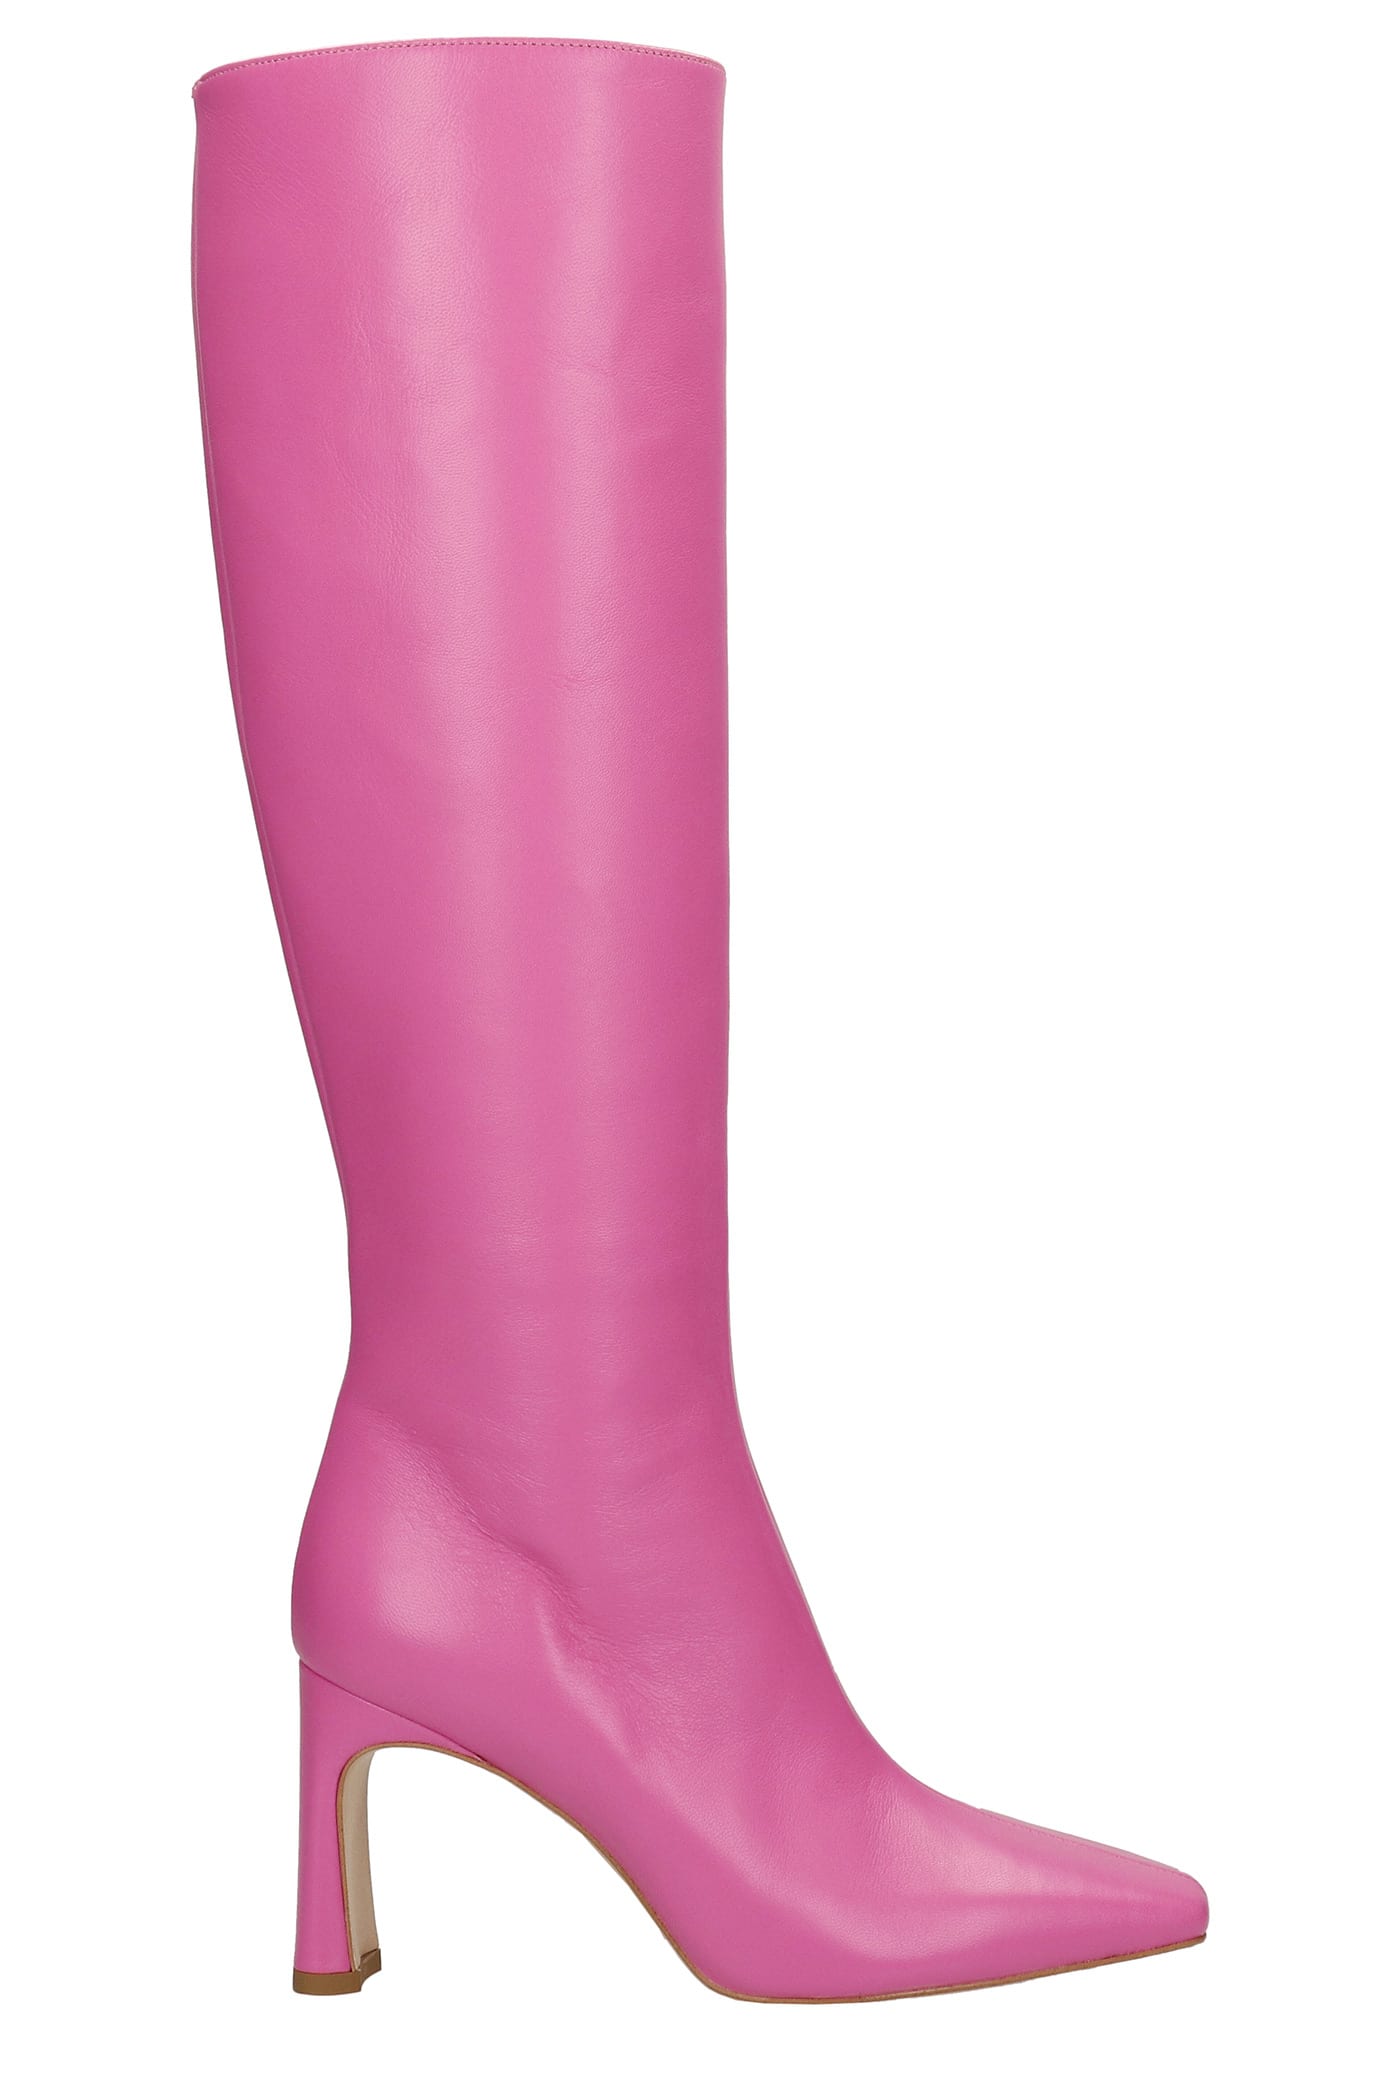 Liu-Jo Squared Lh01 High Heels Boots In Fuxia Leather